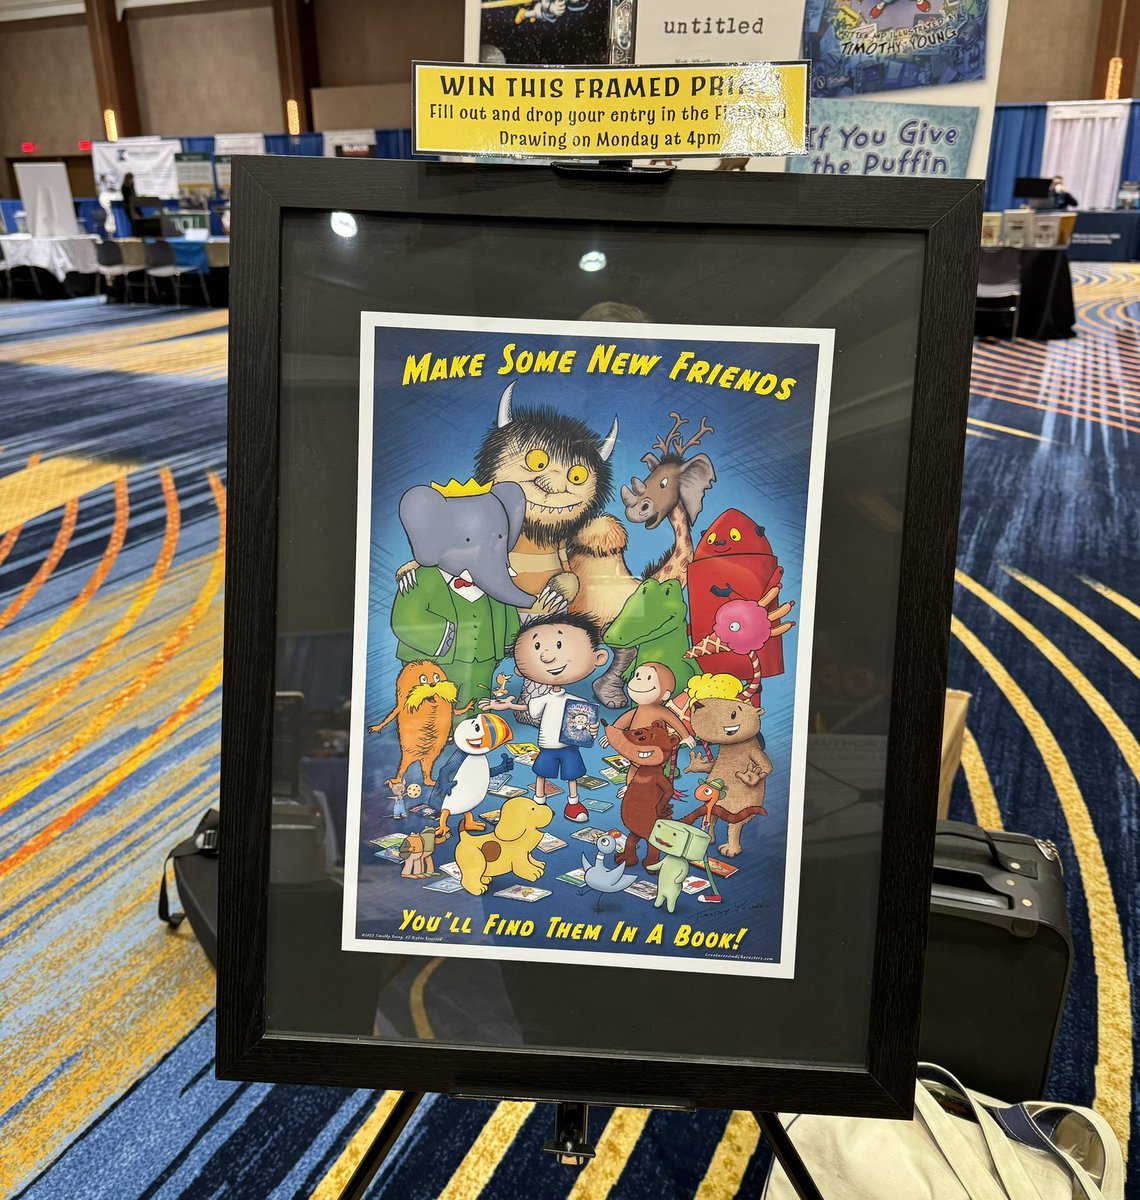 Stop by my table at Authors Alley to sign up to win this framed signed print of some of my characters hanging out with their picture book friends. The winner will be announced at 4pm. #njasl #njasl23 @NJASL